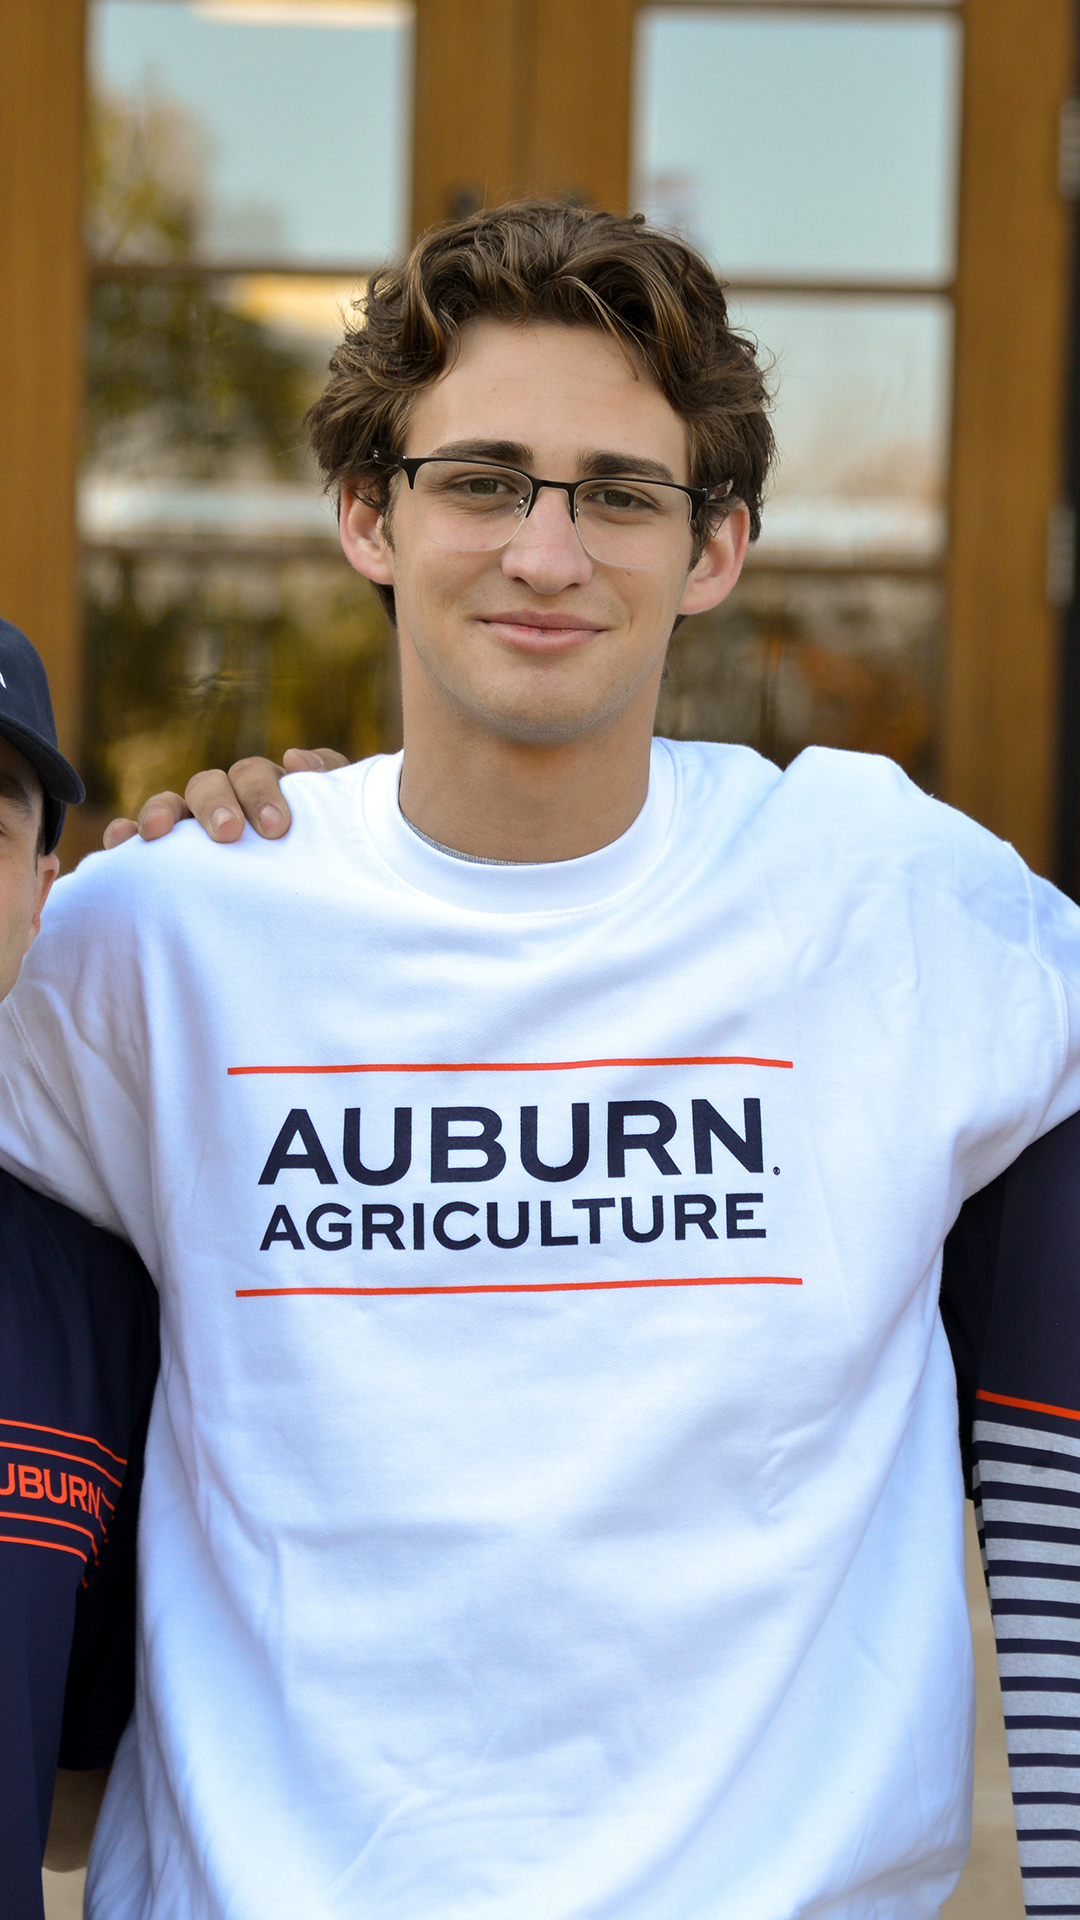 Auburn Ag White Sweatshirt Agriculture Store merch college young man wearing glasses brown hair